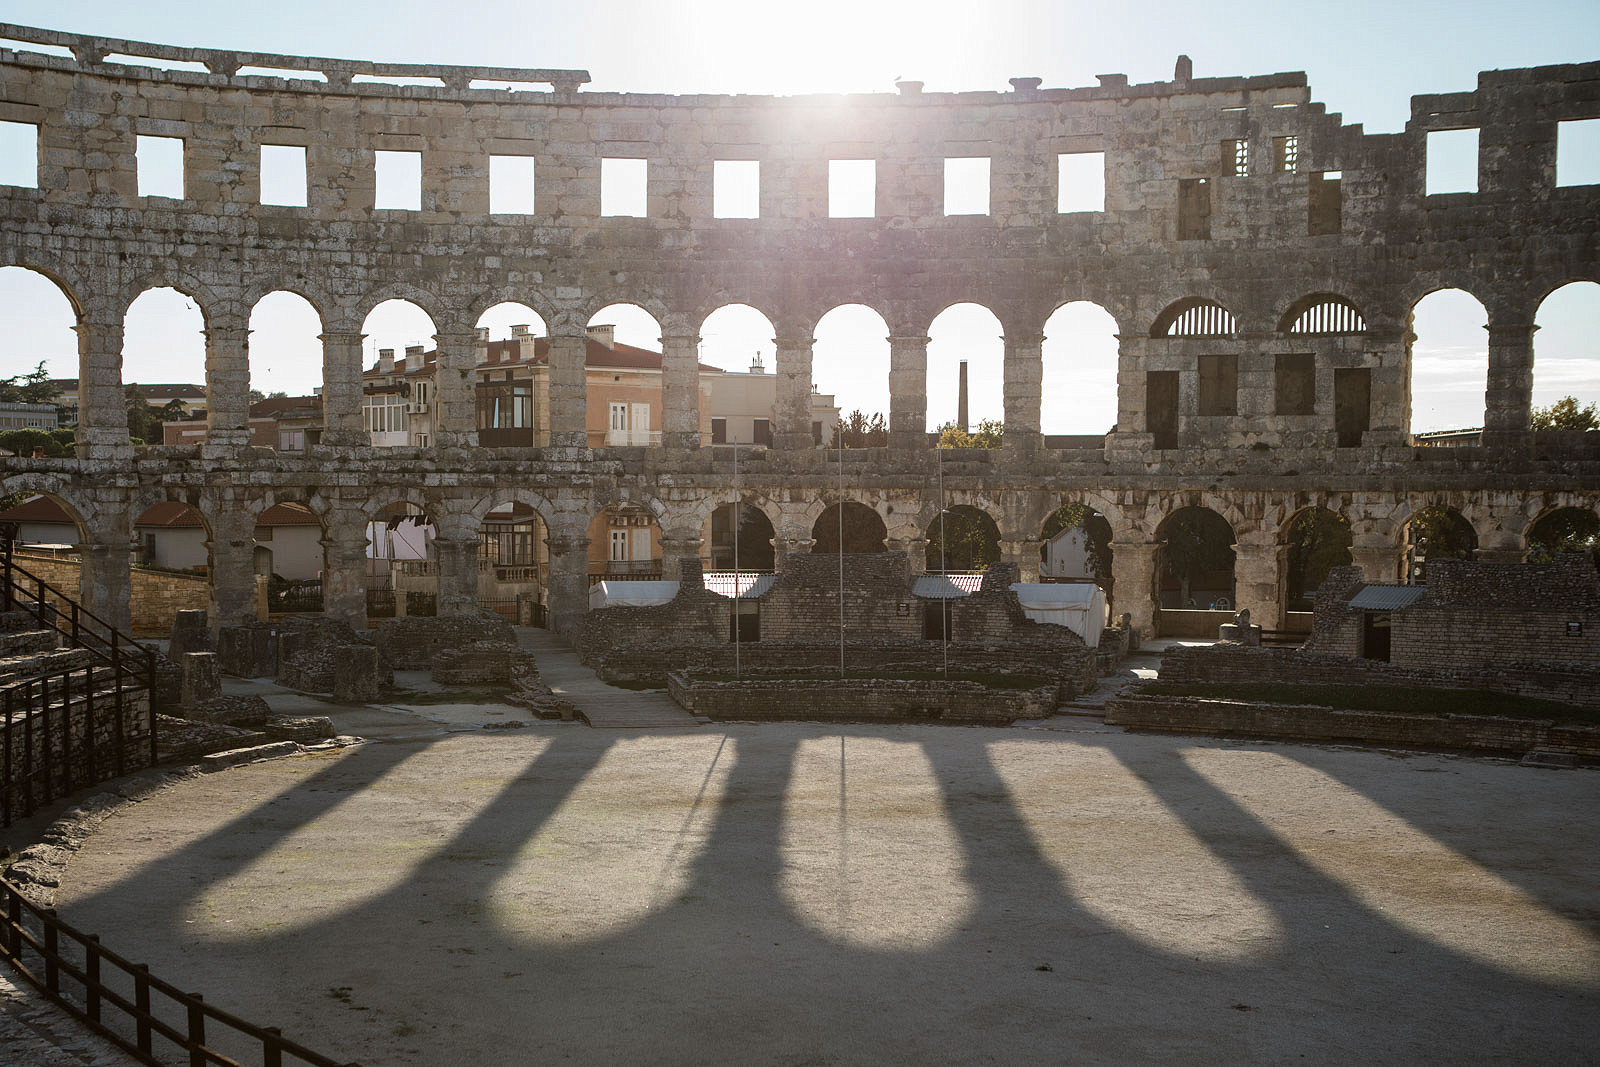 Visiting Pula - a Day Trip From Rovinj and Exploring the Roman Ruins